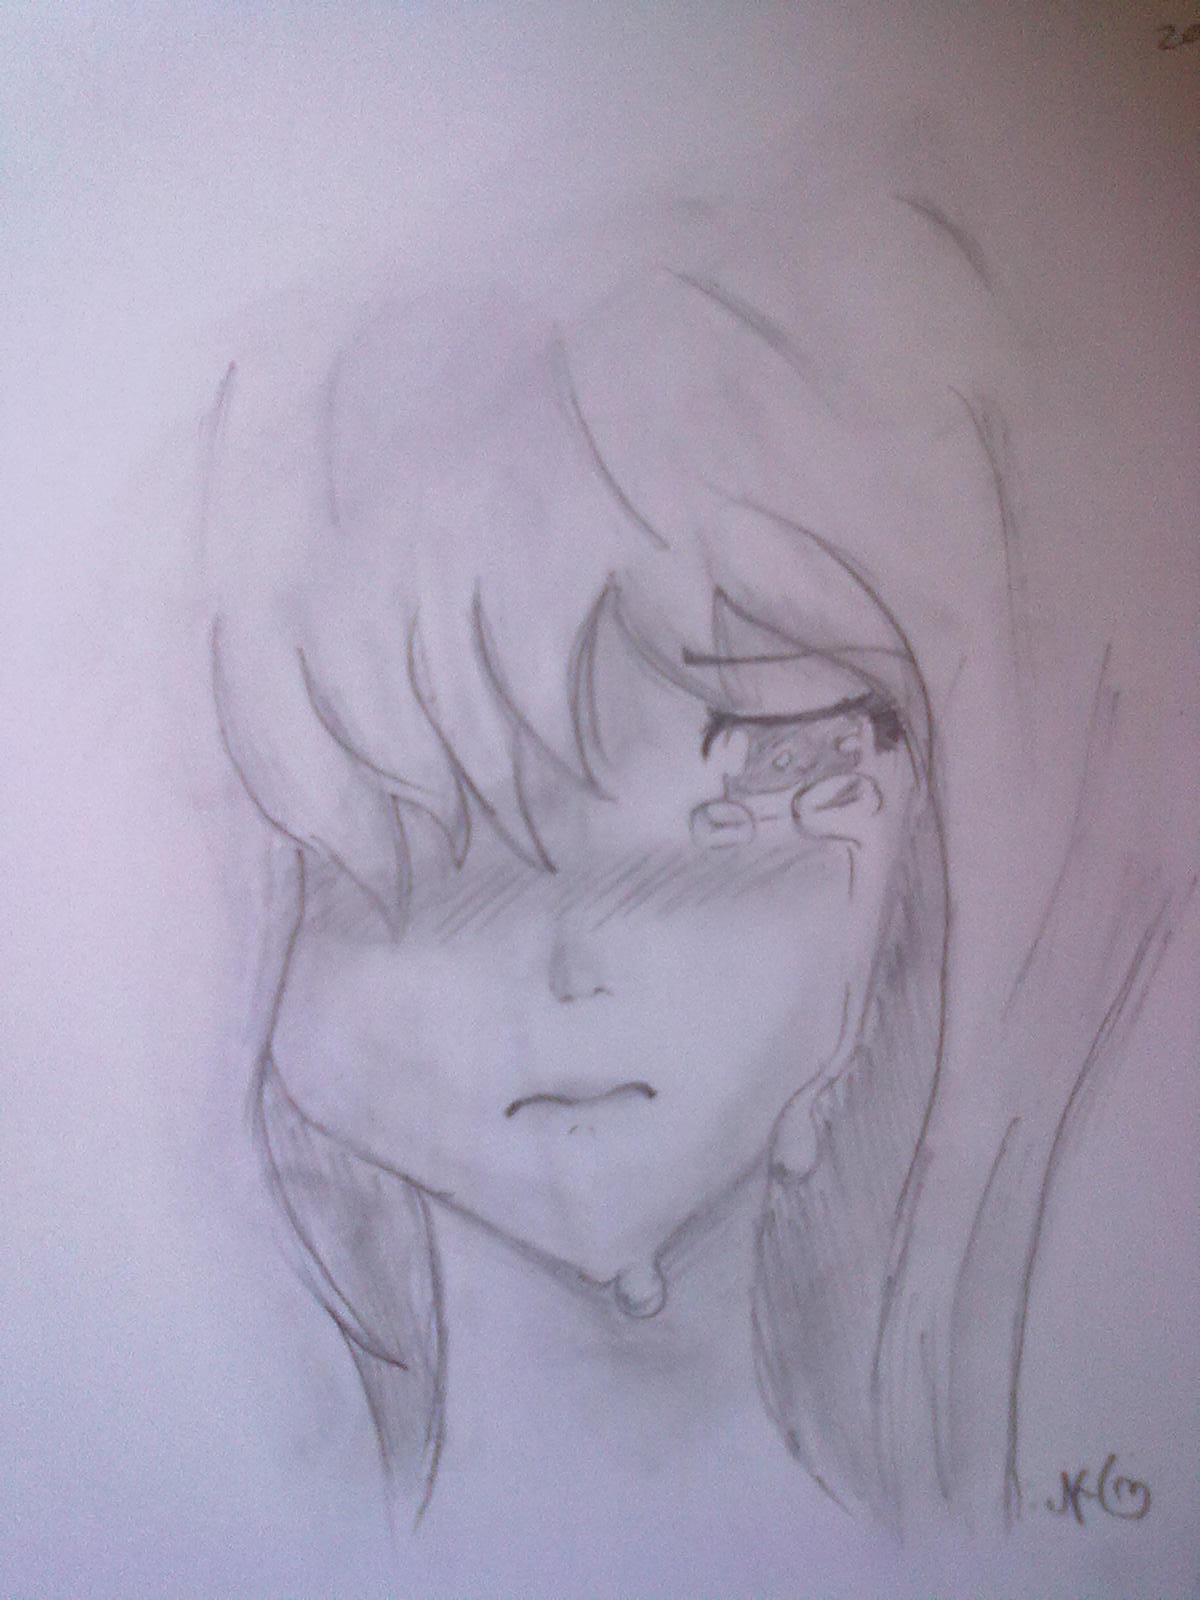 Crying anime girl. by AJCutiePie on DeviantArt